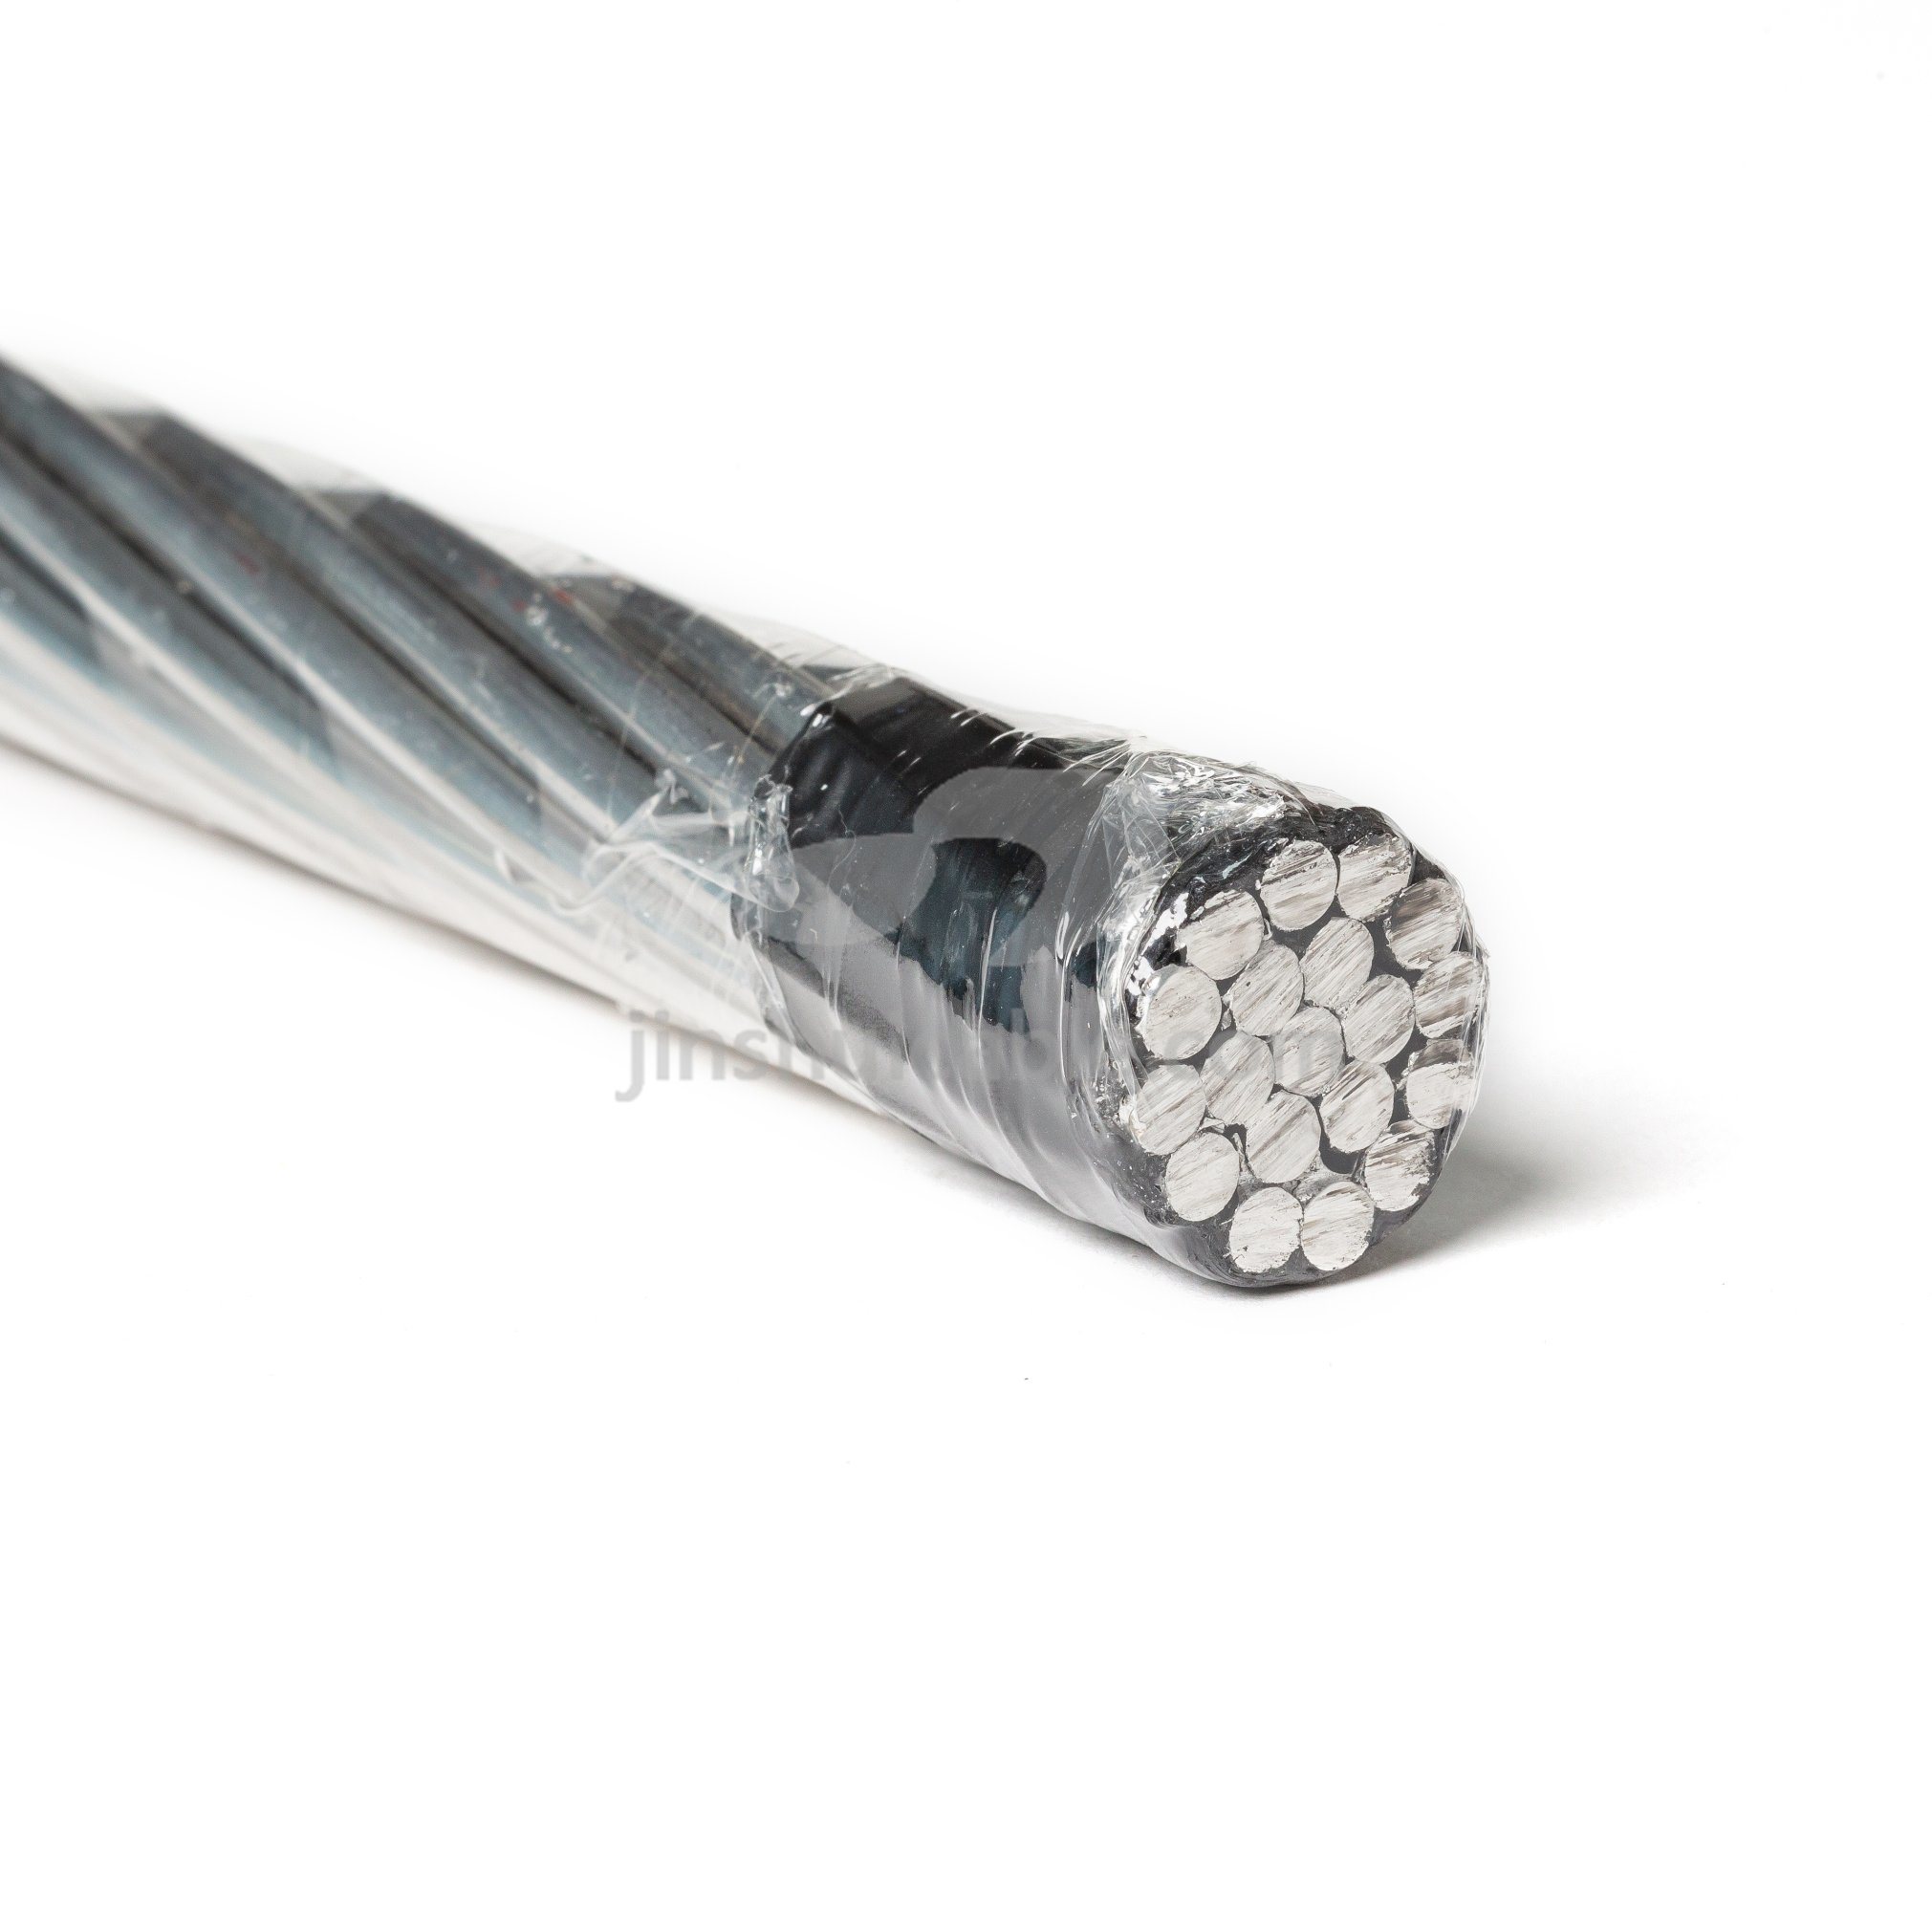 ACSR Turkey 6AWG Aluminium Conductor Steel Reinforced for Overhead Transmission Line Project